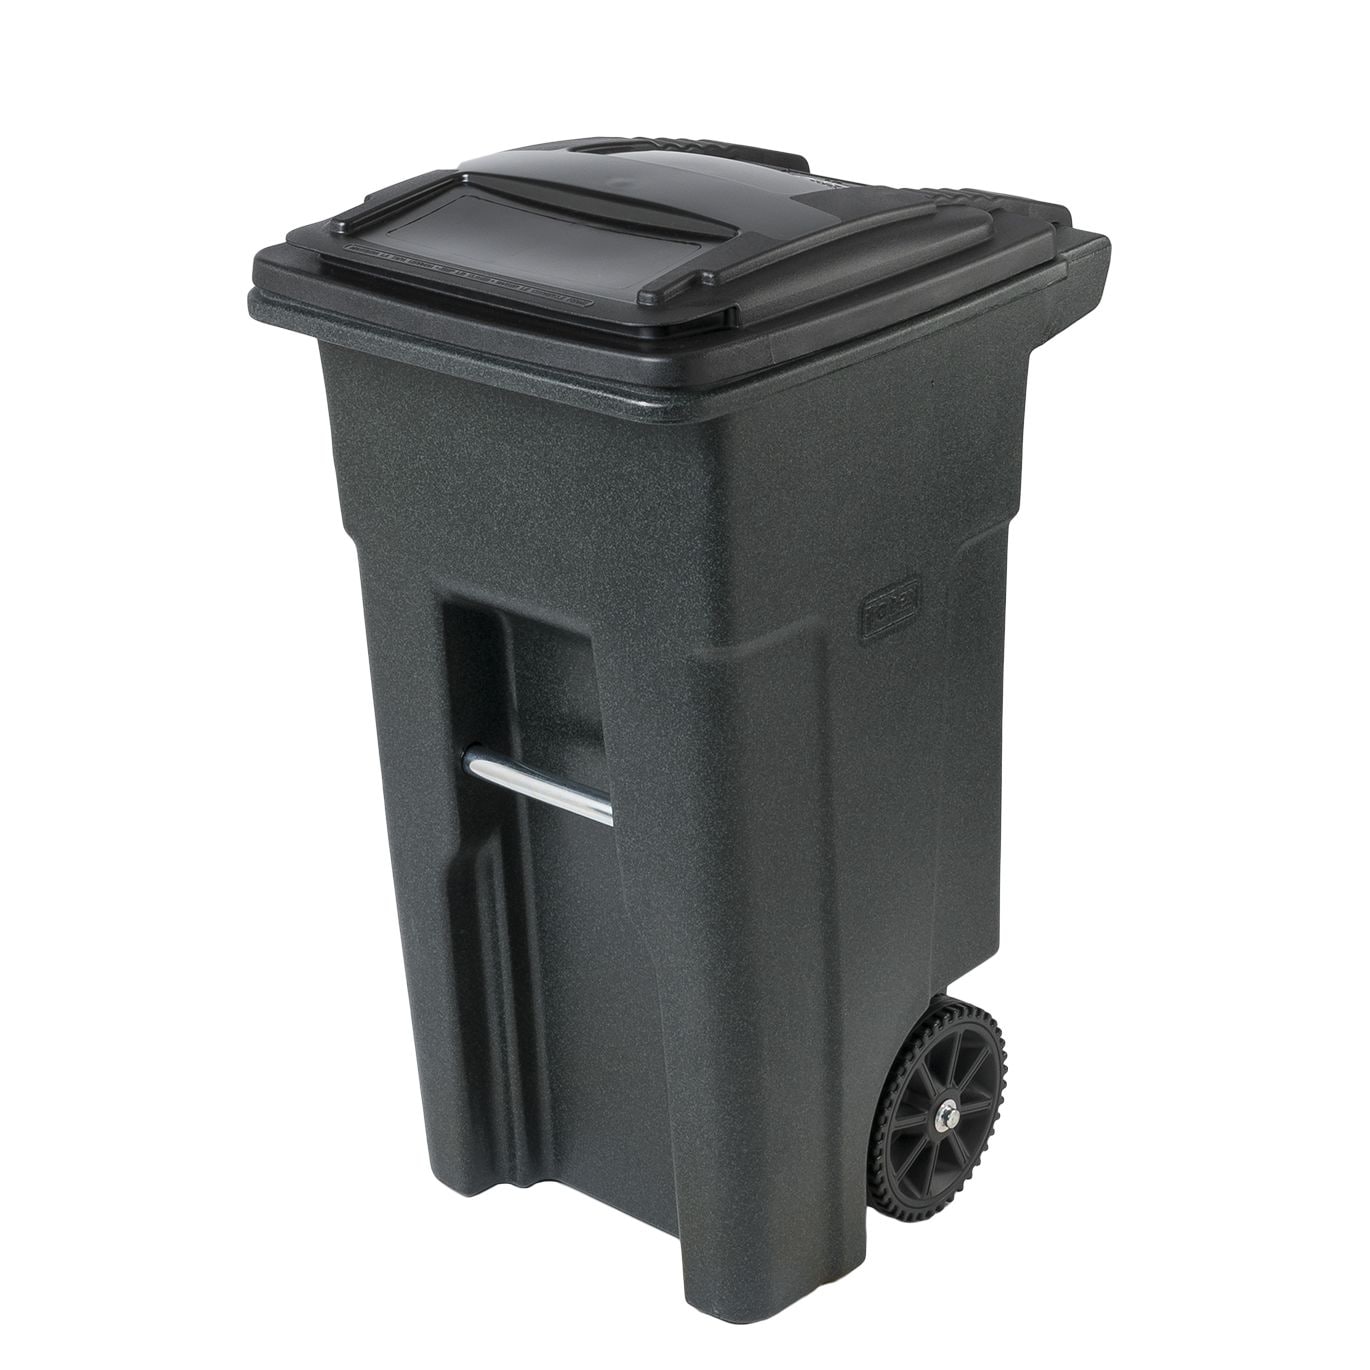 United Solutions Rough & Rugged 34 Gal. Black Wheeled Trash Can